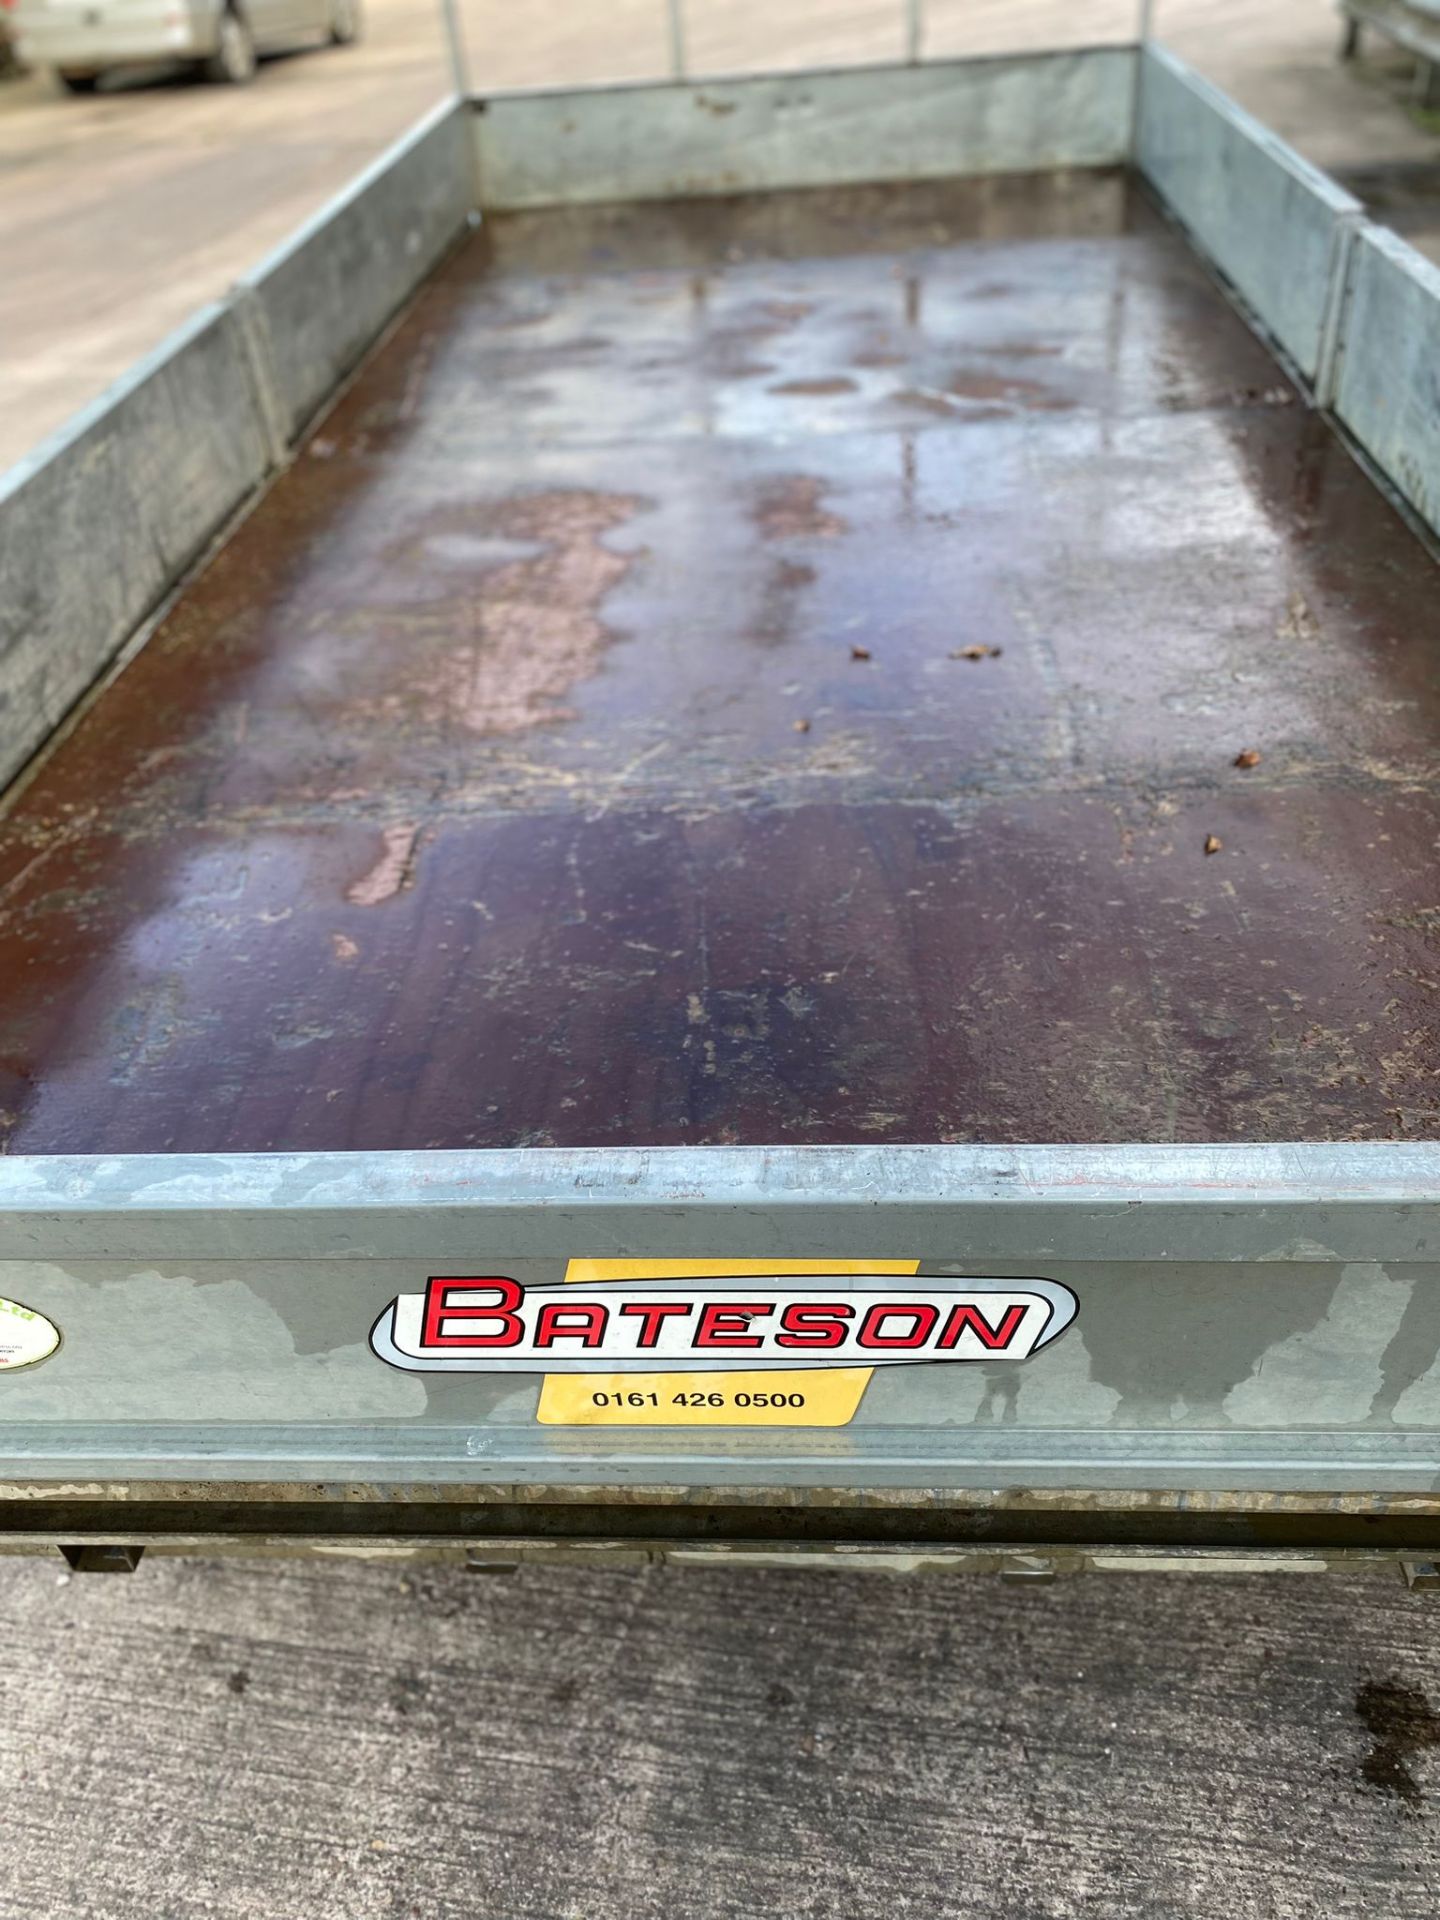 2007 BATESON TRAILER - IN VERY GOOD CONDITION WITH RAMPS, BRAKES ALL WORK, LIGHTS ALL WORK - Bild 8 aus 11